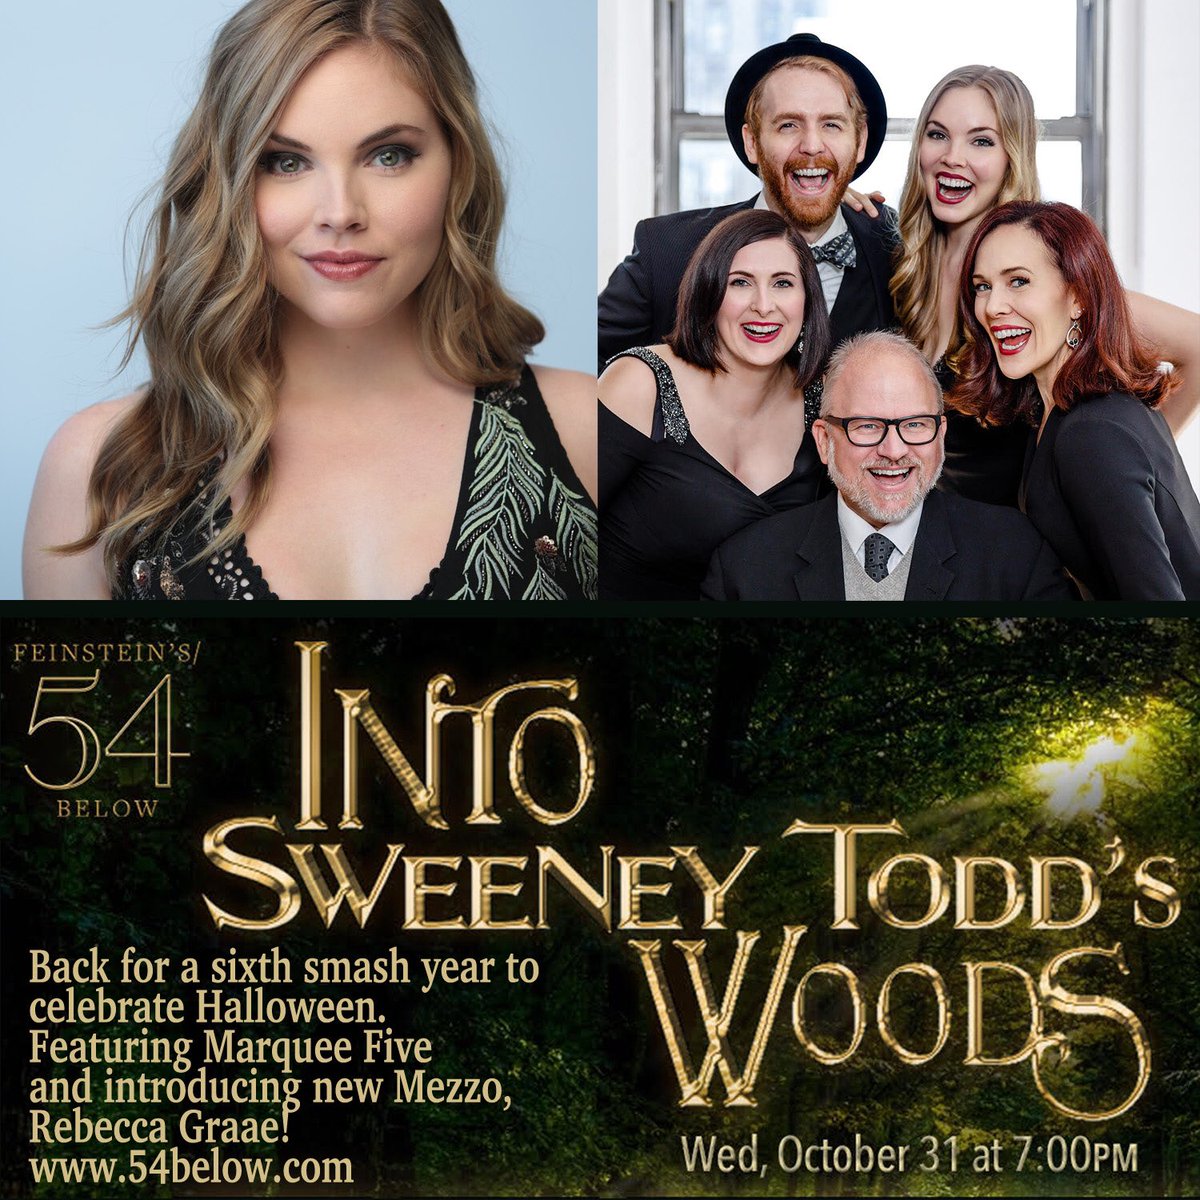 In “Into Sweeney Todd’s Woods” on Halloween Night, we share the @54below stage w/ #Broadway and #Cabaret greats, and introduce our new Mezzo, Rebecca Graae! $5 discount online with code “ISTW5” at 54Below.com. 7pm start (doors open 5pm). 🎃🎶🎃🎶 #Sondheim  #nyc